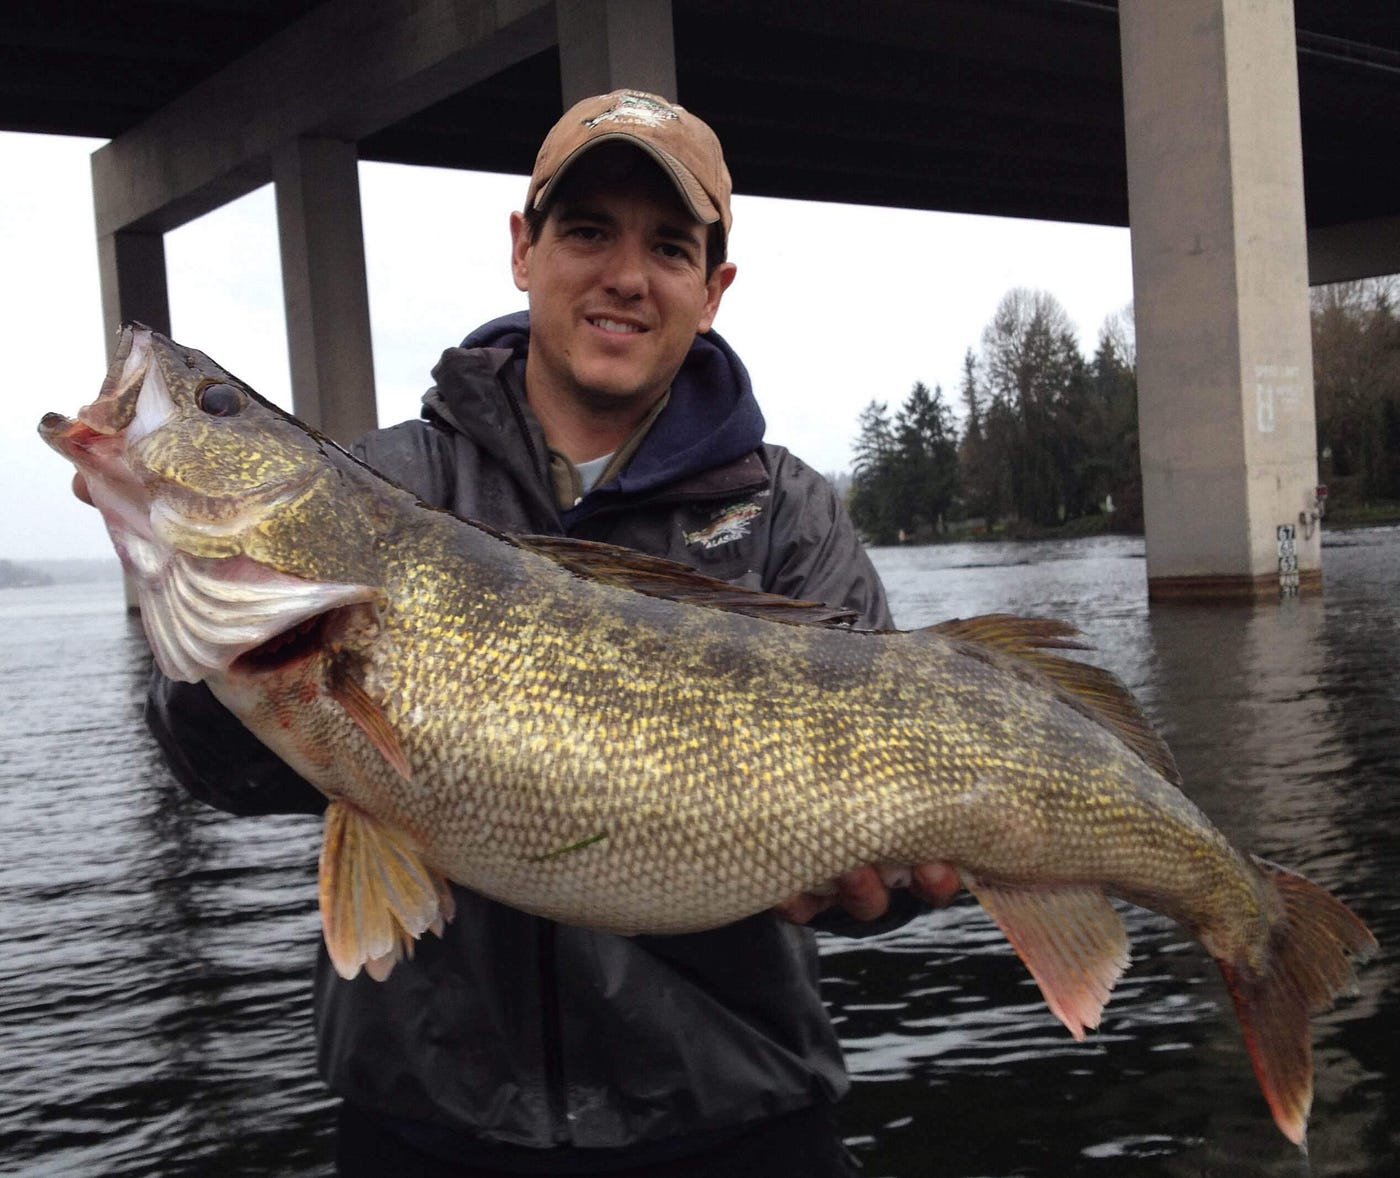 Lake Washington Walleye Outfitted With Acoustic Tags For Study